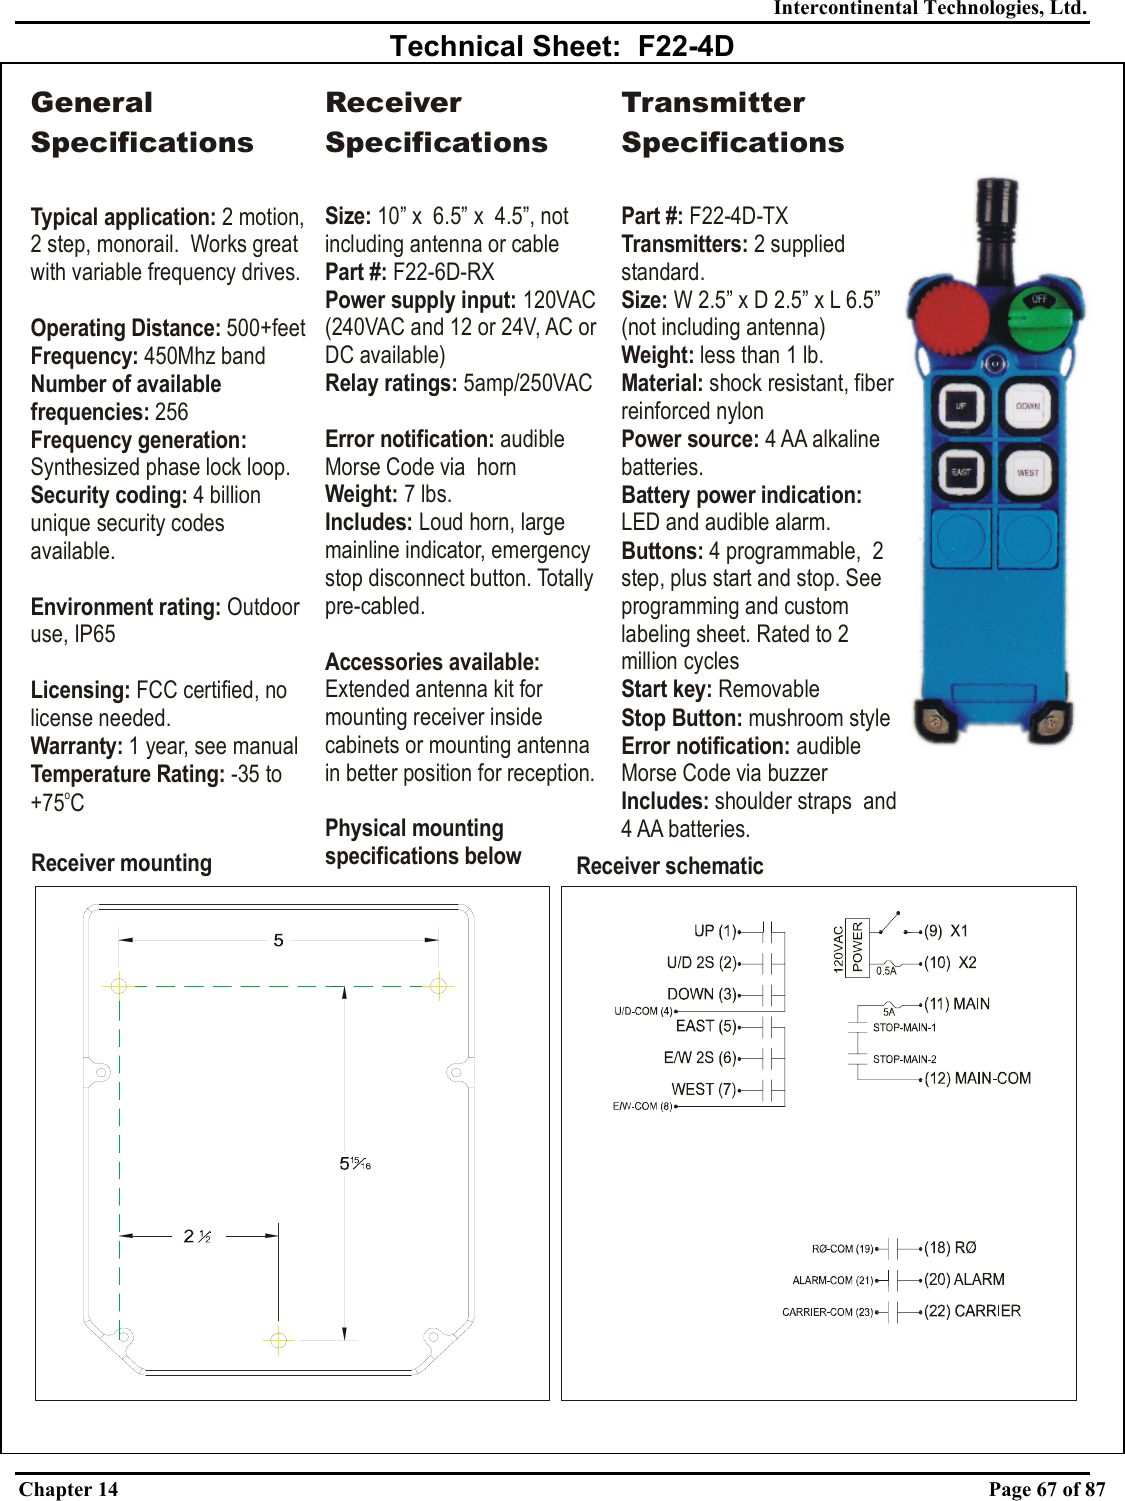 Intercontinental Technologies, Ltd. Chapter 14    Page 67 of 87  Technical Sheet:  F22-4D Receiver mounting Receiver schematicGeneral SpecificationsTypical application: Operating Distance:Frequency: Number of available frequencies:Frequency generation: Security coding: Environment rating: Licensing:Warranty:2 motion, 2 step, monorail.  Works great with variable frequency drives. 500+feet450Mhz band 256Synthesized phase lock loop.4 billion unique security codes available.Outdoor use, IP65 FCC certified, no license needed. 1 year, see manualTemperature Rating: -35 to +75 CoReceiver SpecificationsSize: 10” x  6.5” x  4.5”, not including antenna or cableand 12 or 24V, AC or DC available)Part #:Power supply input: Relay ratings: Error notification: Weight: Includes: Accessories available: Physical mounting specifications below F22-6D-RX120VAC (240VAC 5amp/250VACaudible Morse Code via  horn7 lbs.Loud horn, large mainline indicator, emergency stop disconnect button. Totally pre-cabled.Extended antenna kit for mounting receiver inside cabinets or mounting antenna in better position for reception.Transmitter SpecificationsPart #: Transmitters: Size: Weight: Material: Power source: Buttons: Start key: Stop Button: ication: Includes: F22-4D-TX2 supplied standard.W 2.5” x D 2.5” x less than 1 lb.shock resistant, fiber reinforced nylon4 AA alkaline batteries.4 programmable,  2 step, plus start and stop. See programming and custom labeling sheet. Rated to 2 million cyclesRemovablemushroom styleaudible Morse Code via buzzershoulder straps  and 4 AA batteries.L 6.5” (not including antenna)LED and audible alarm.Battery power indication: Error notif 